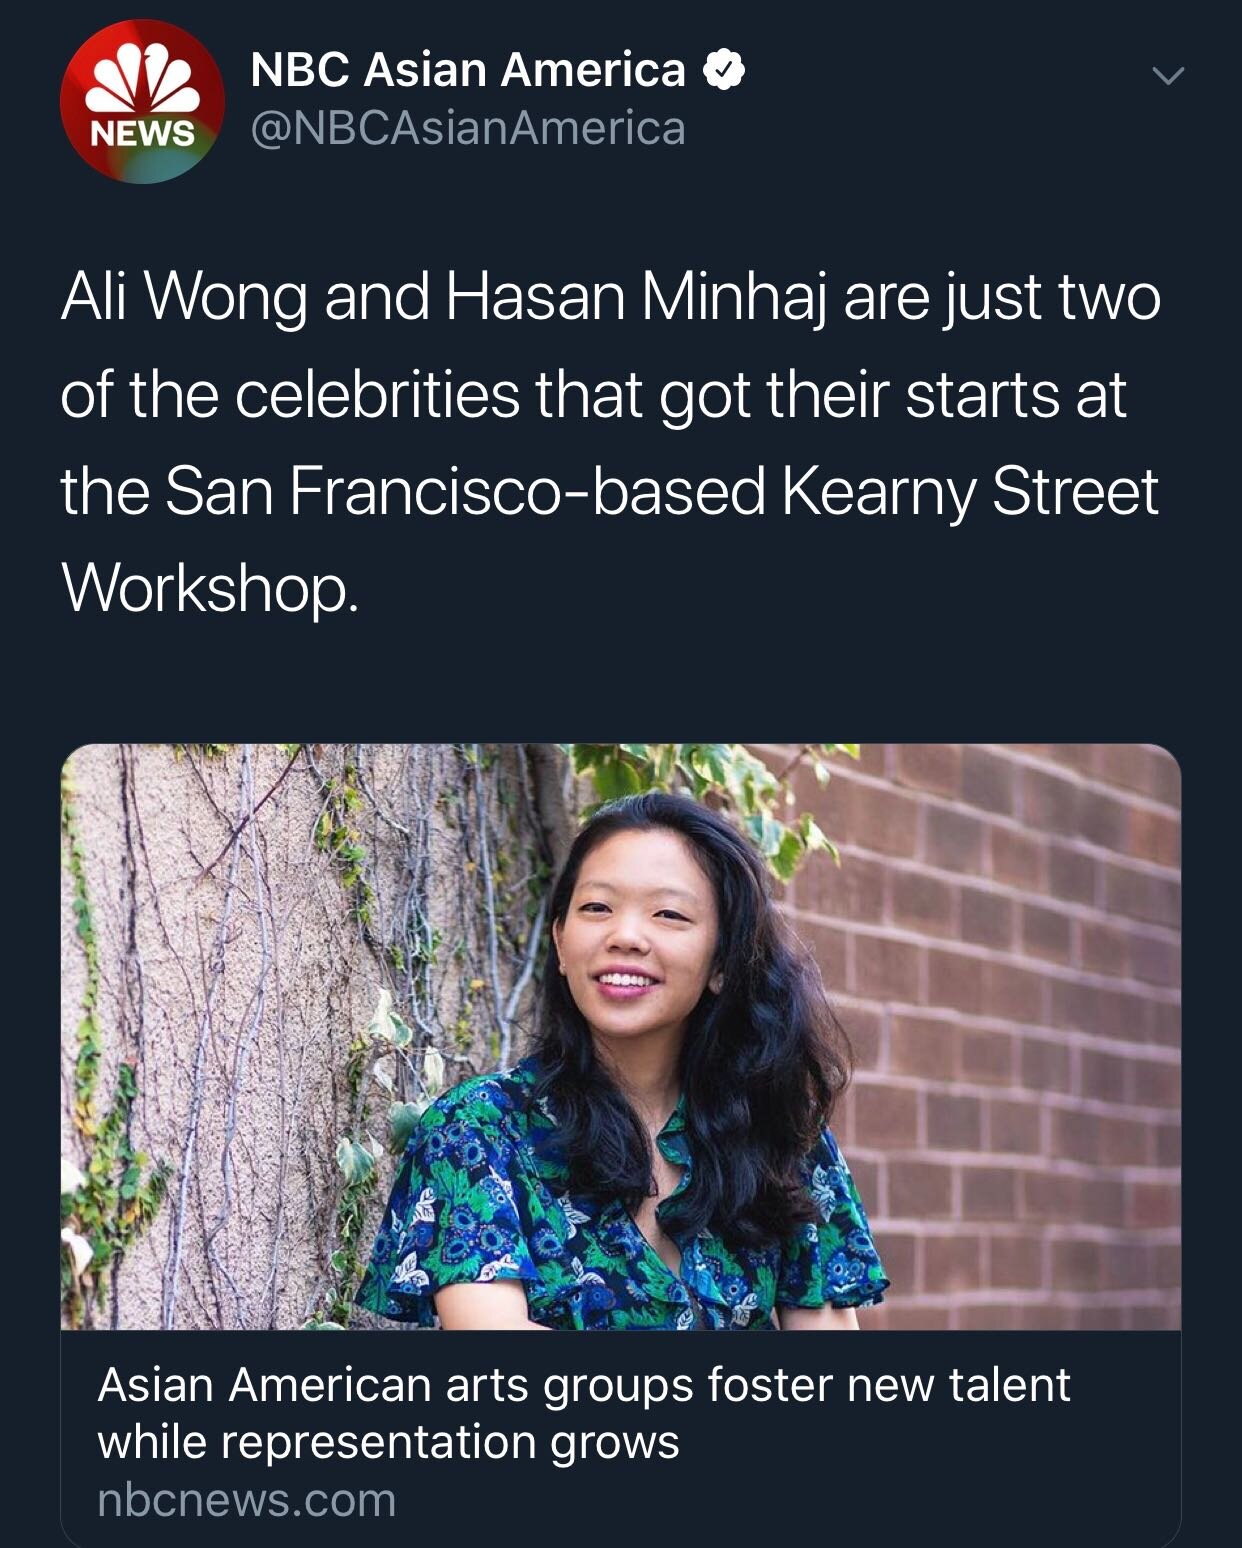 Copy of From Hasan Minhaj to Ali Wong, how Asian American arts groups are fostering stars